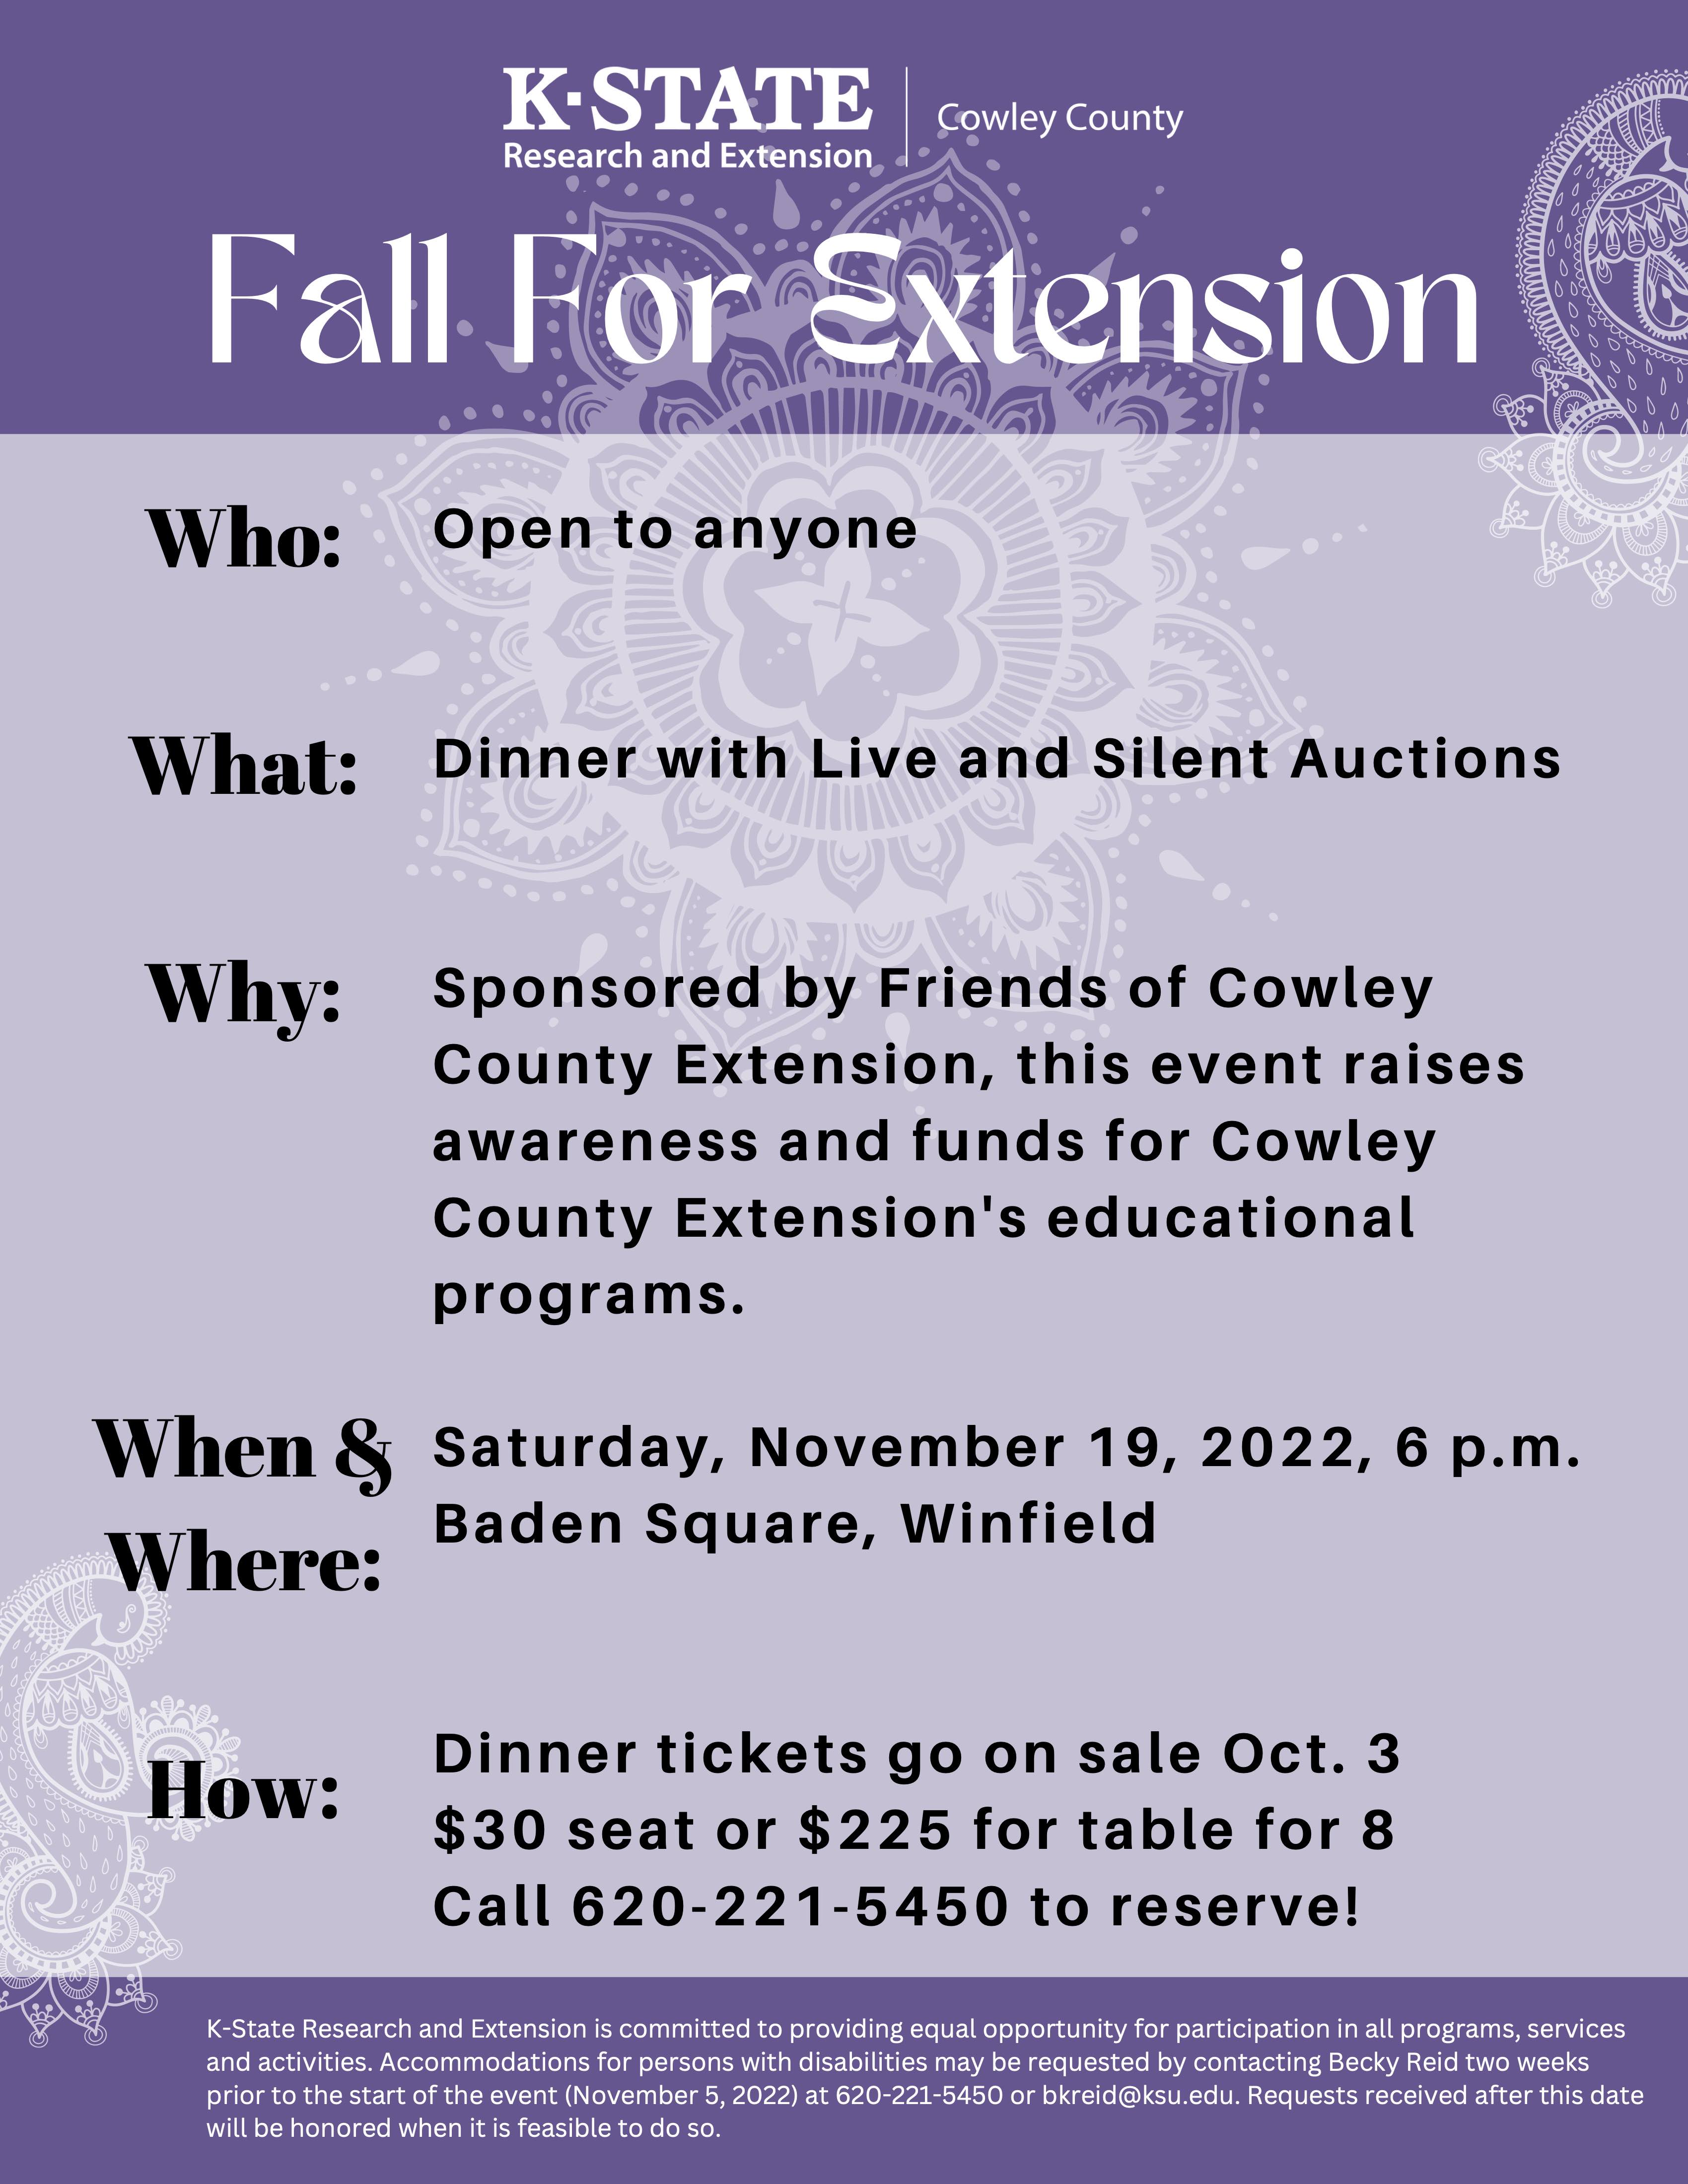 Fall for Extension event info